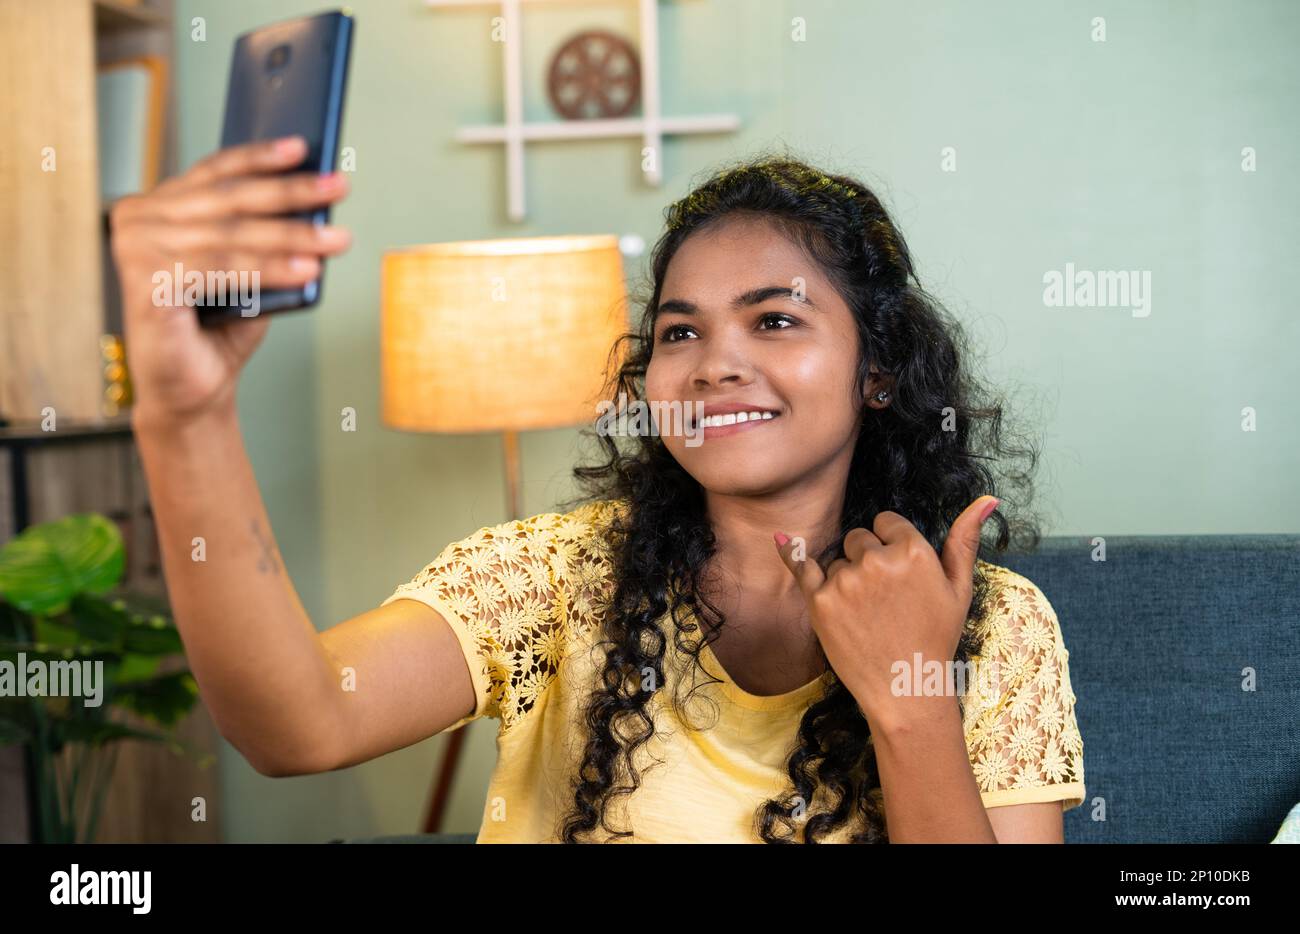 Happy smiling young girl taking selfie on mobile phone by showing hands gesture at home - concept of technology, social media and addiction Stock Photo